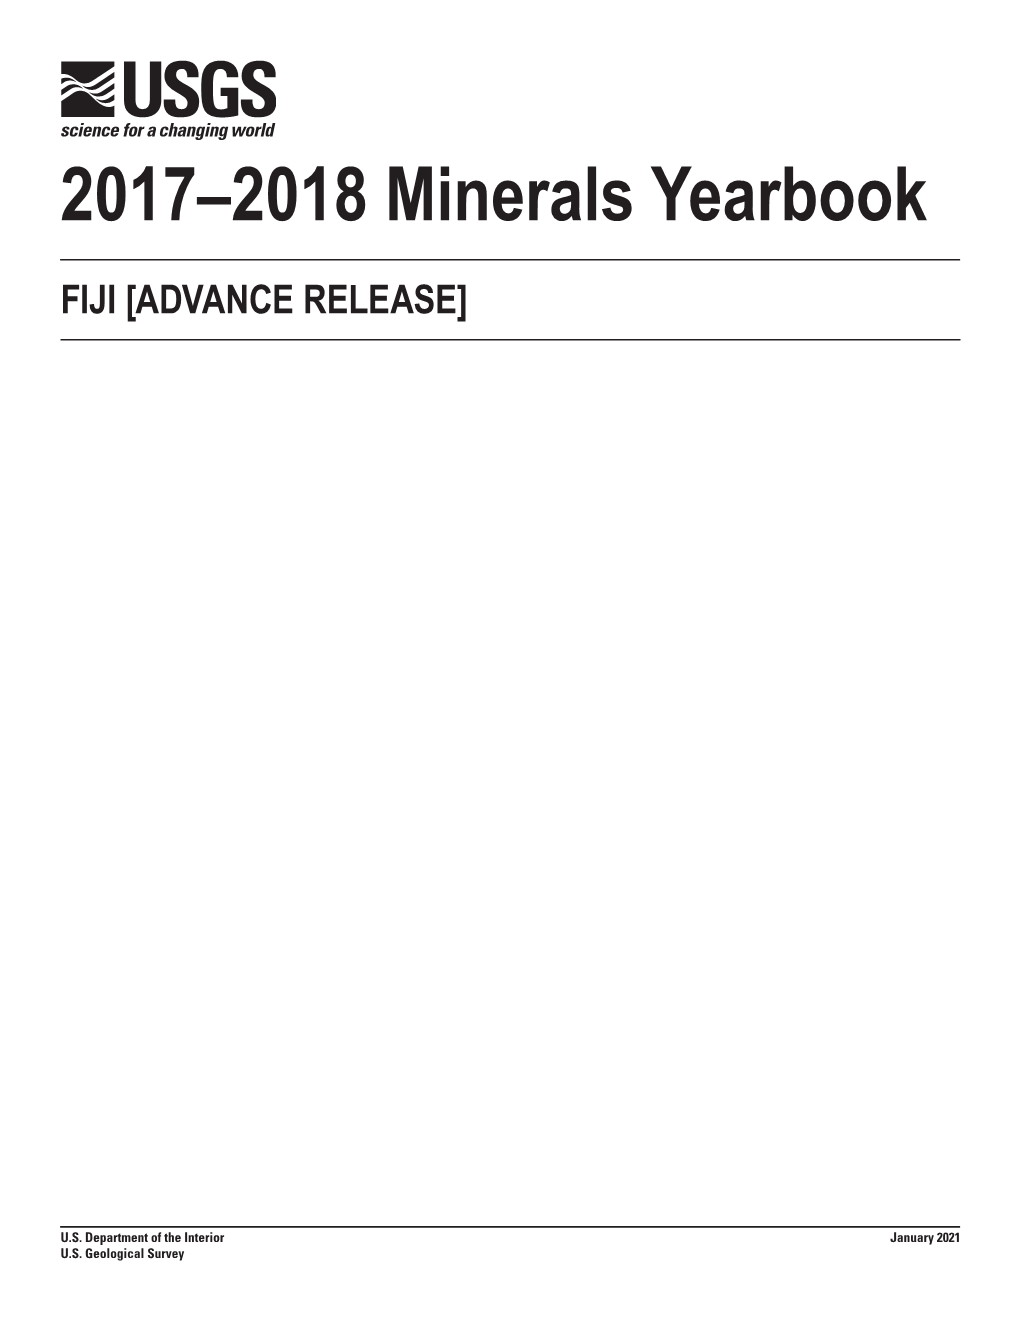 The Mineral Industry of Fiji in 2017-2018